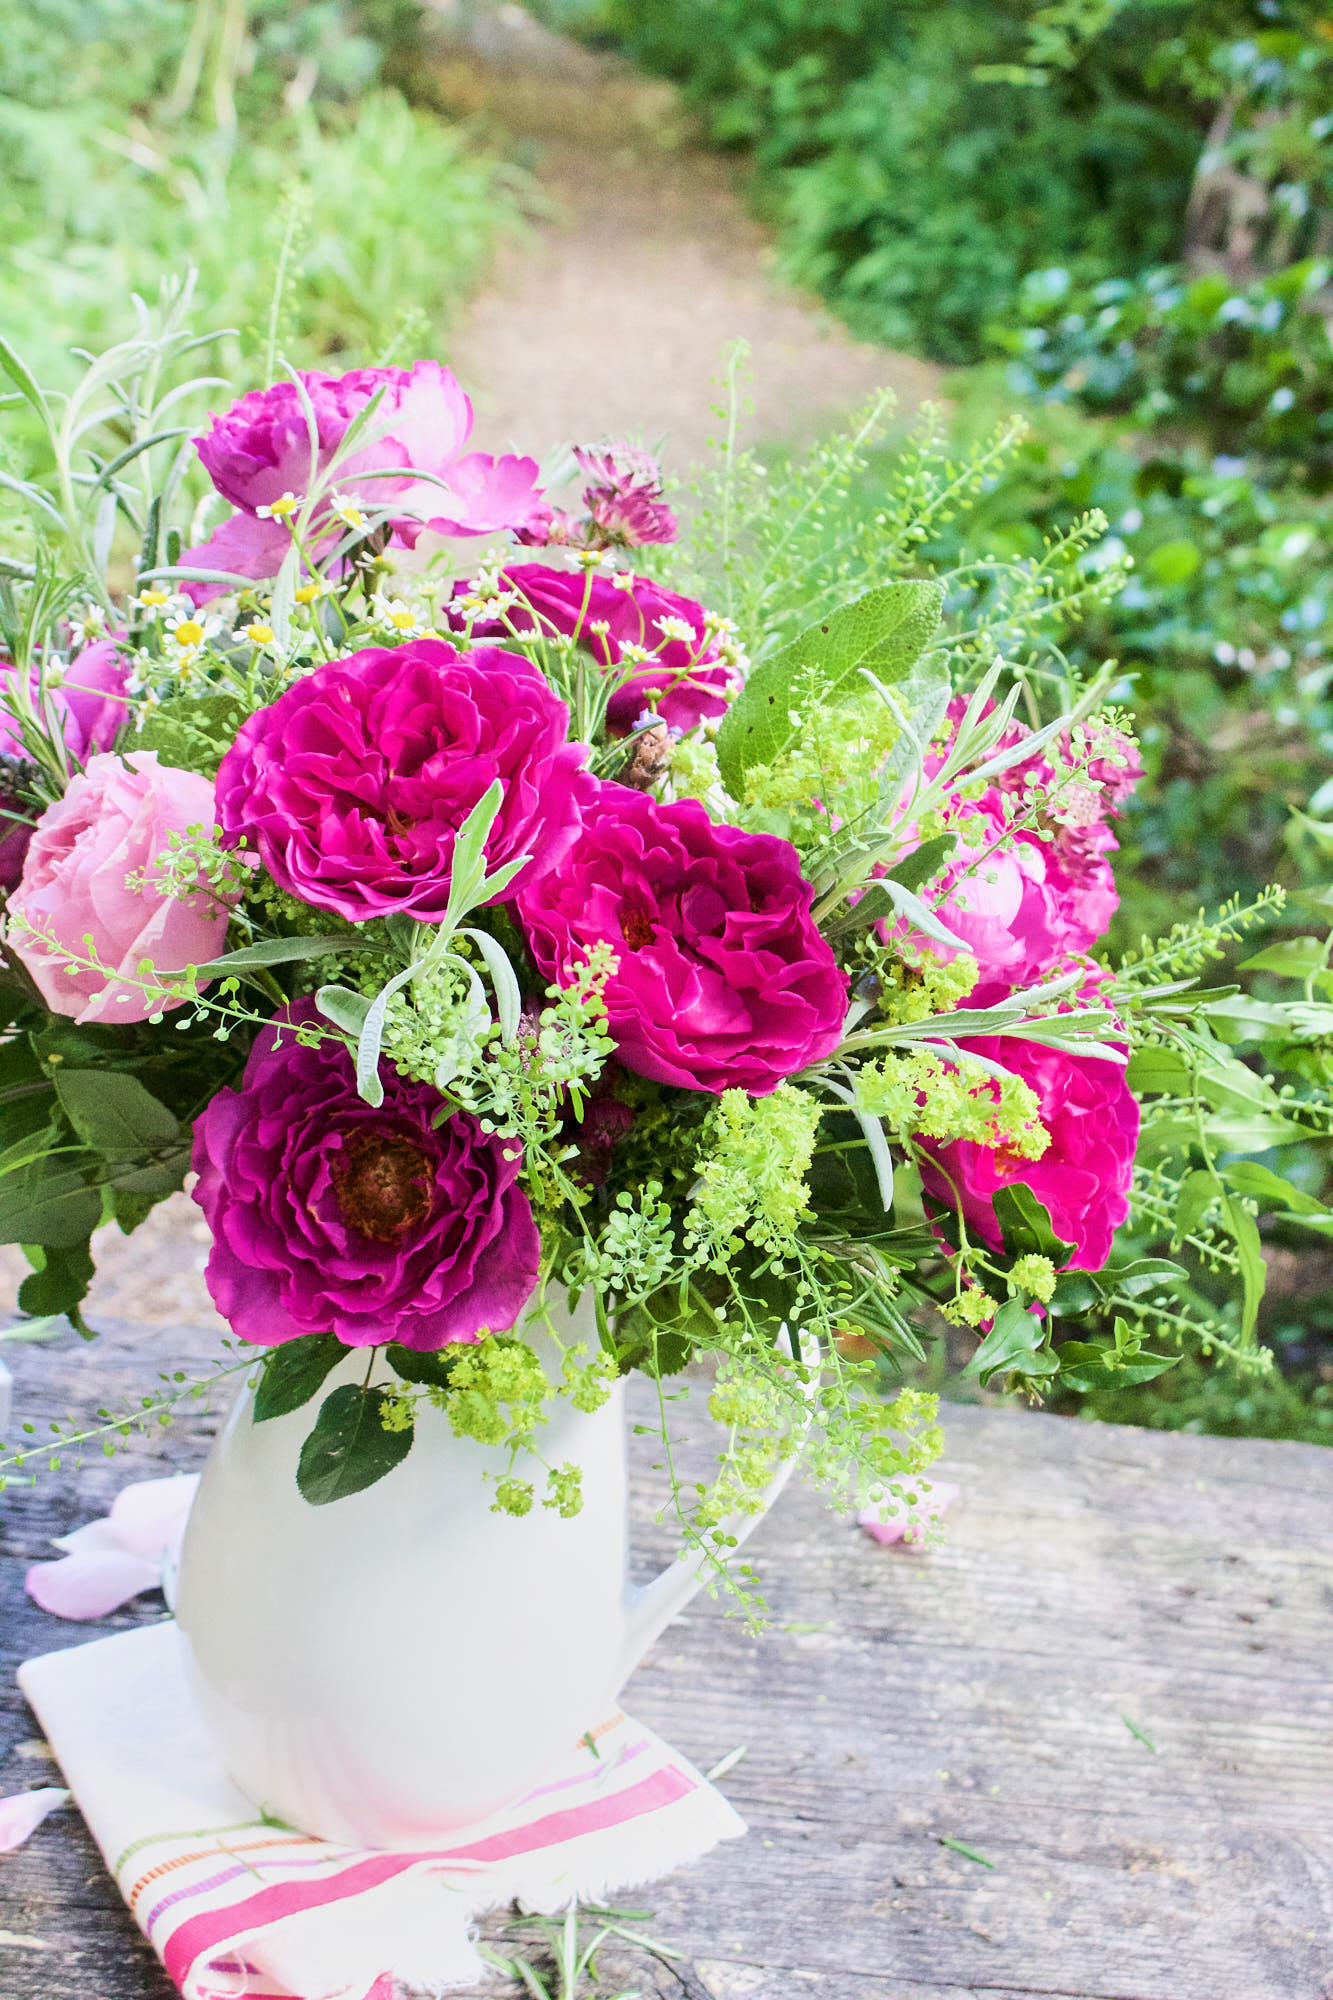 Win a year of flowers from The Real Flower Company - Liz Earle Wellbeing